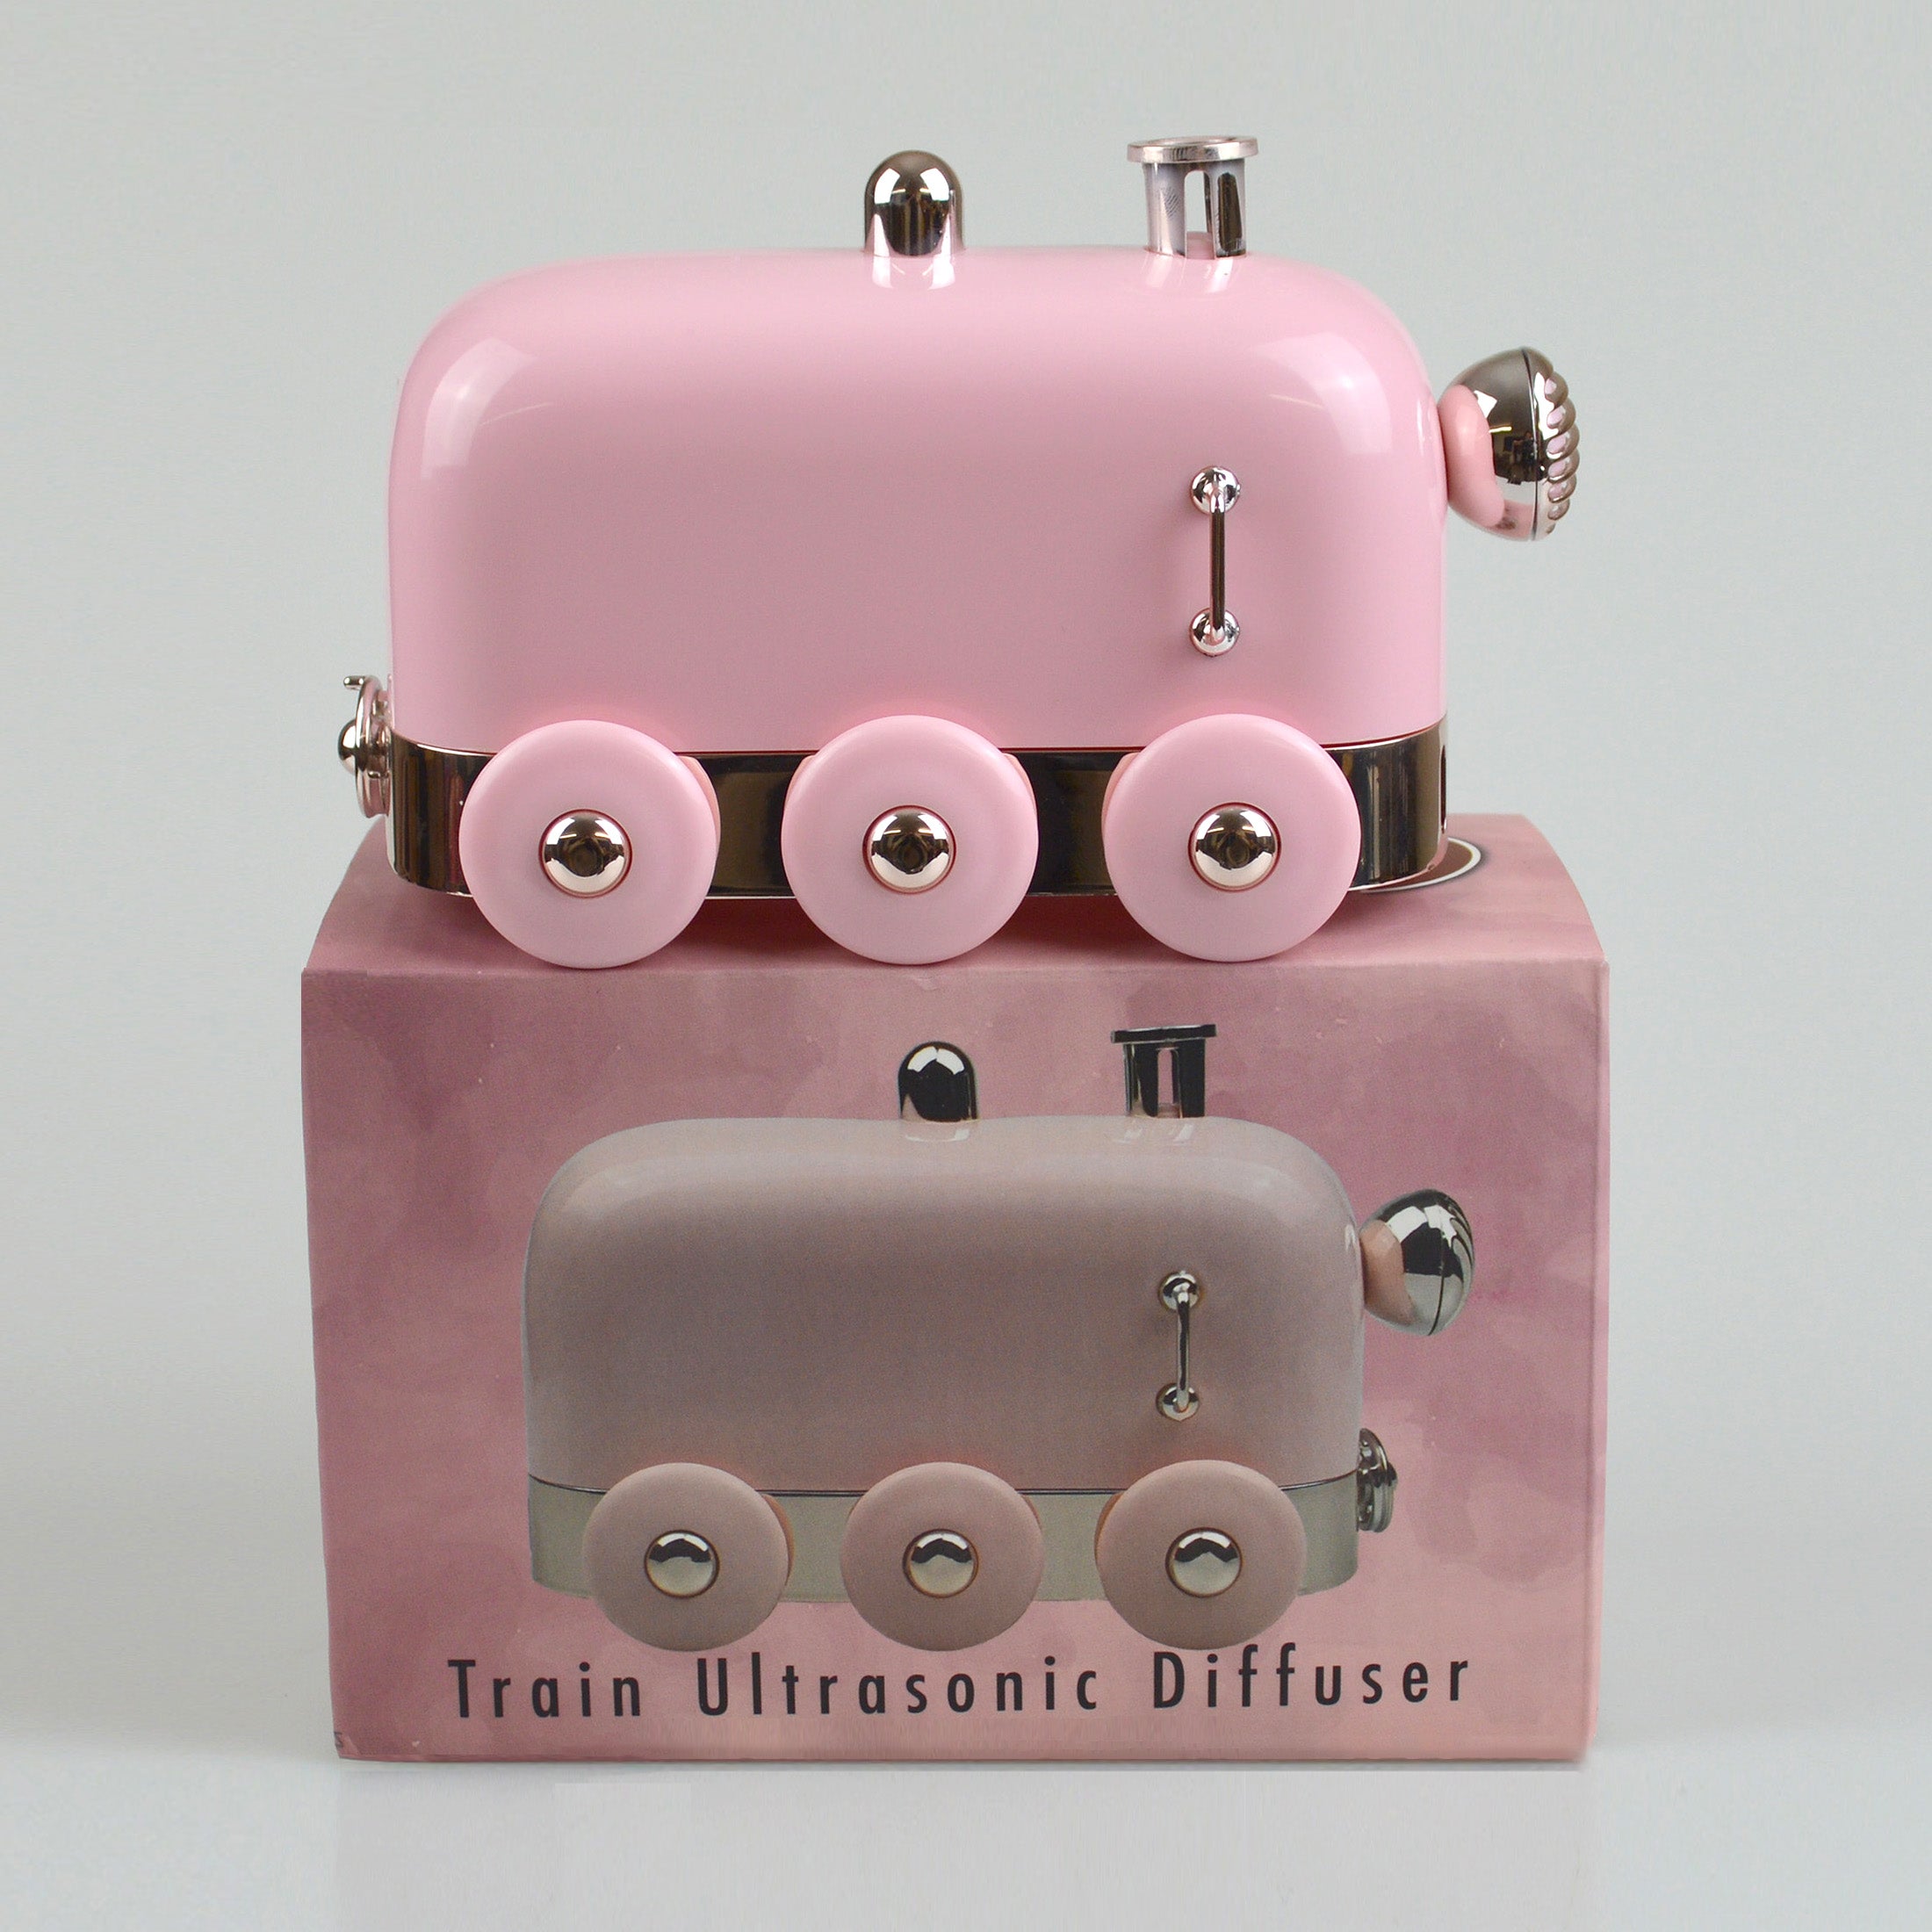 This fun new Pink Ultrasonic Diffuser features colour changing lights and gentle train sound effects